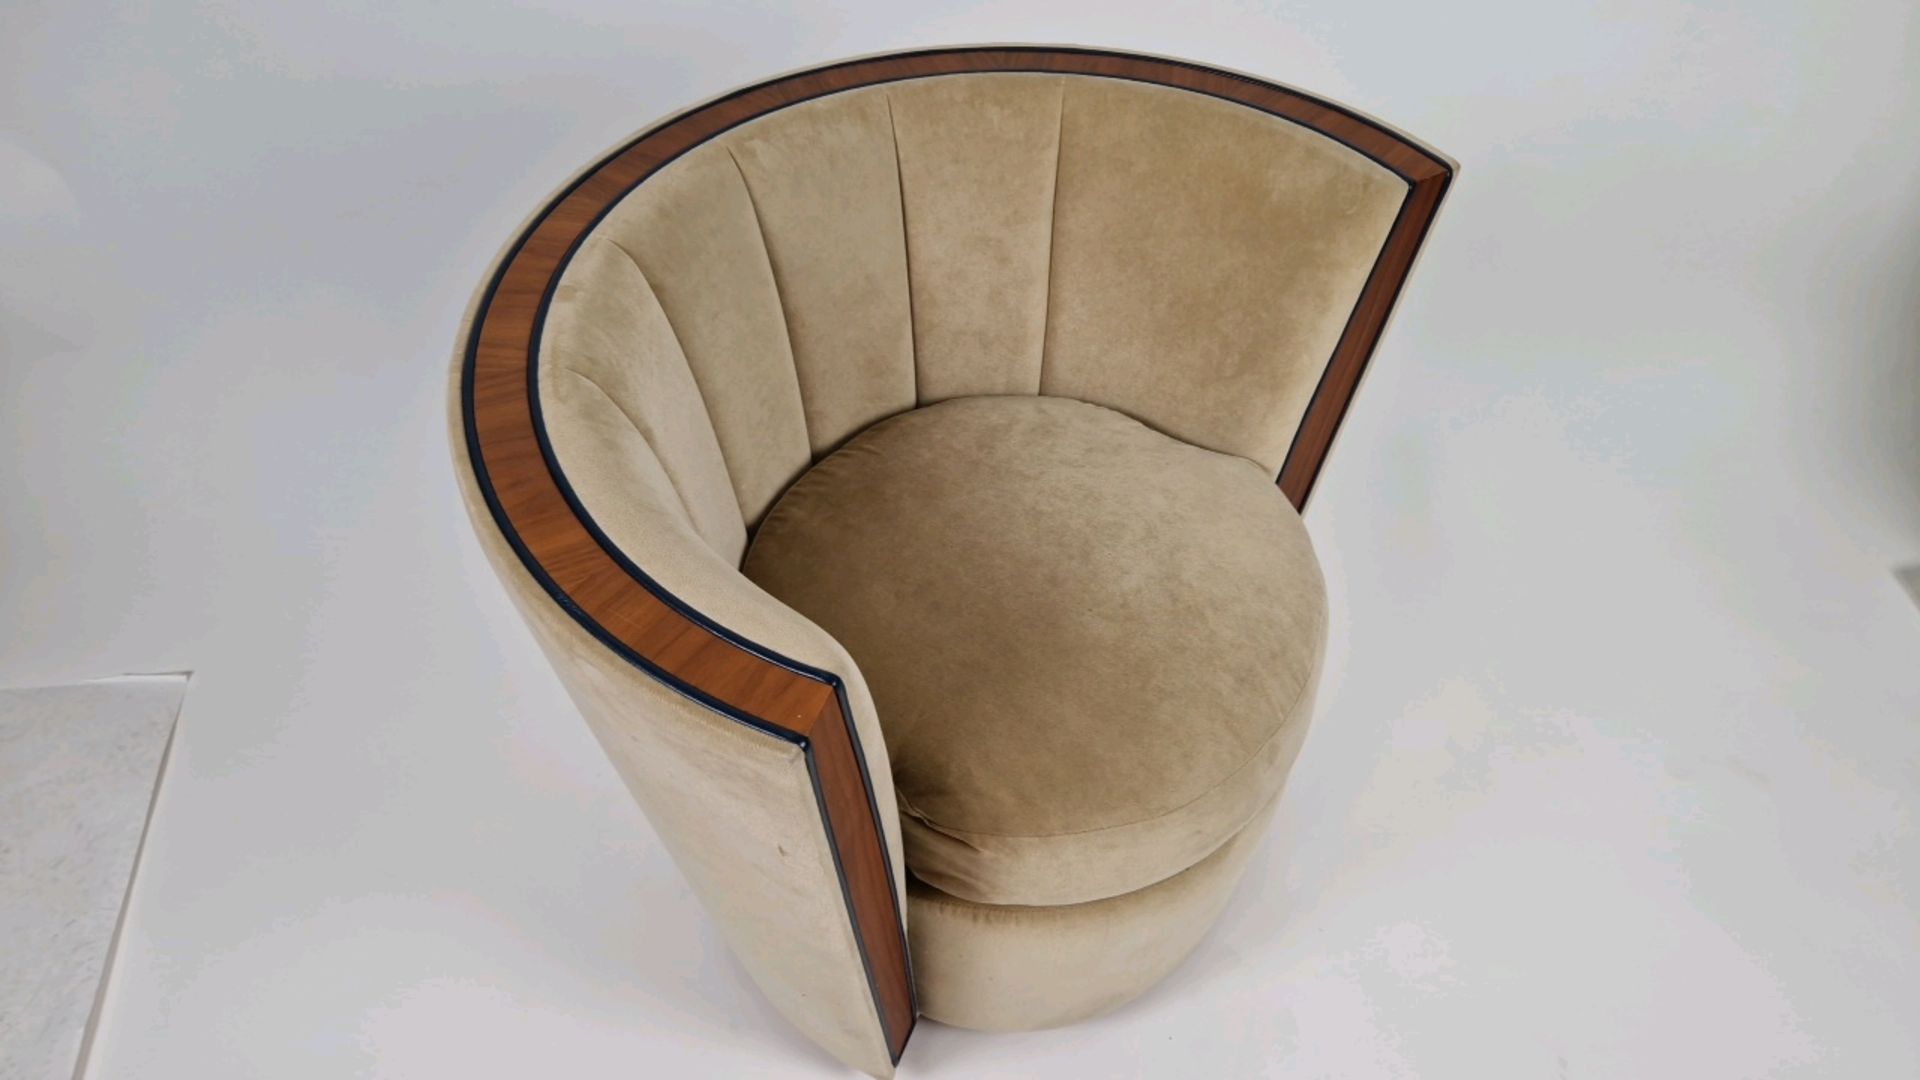 Bespoke Deco Tub Chair Made for Claridge's by David Linley - Image 4 of 9